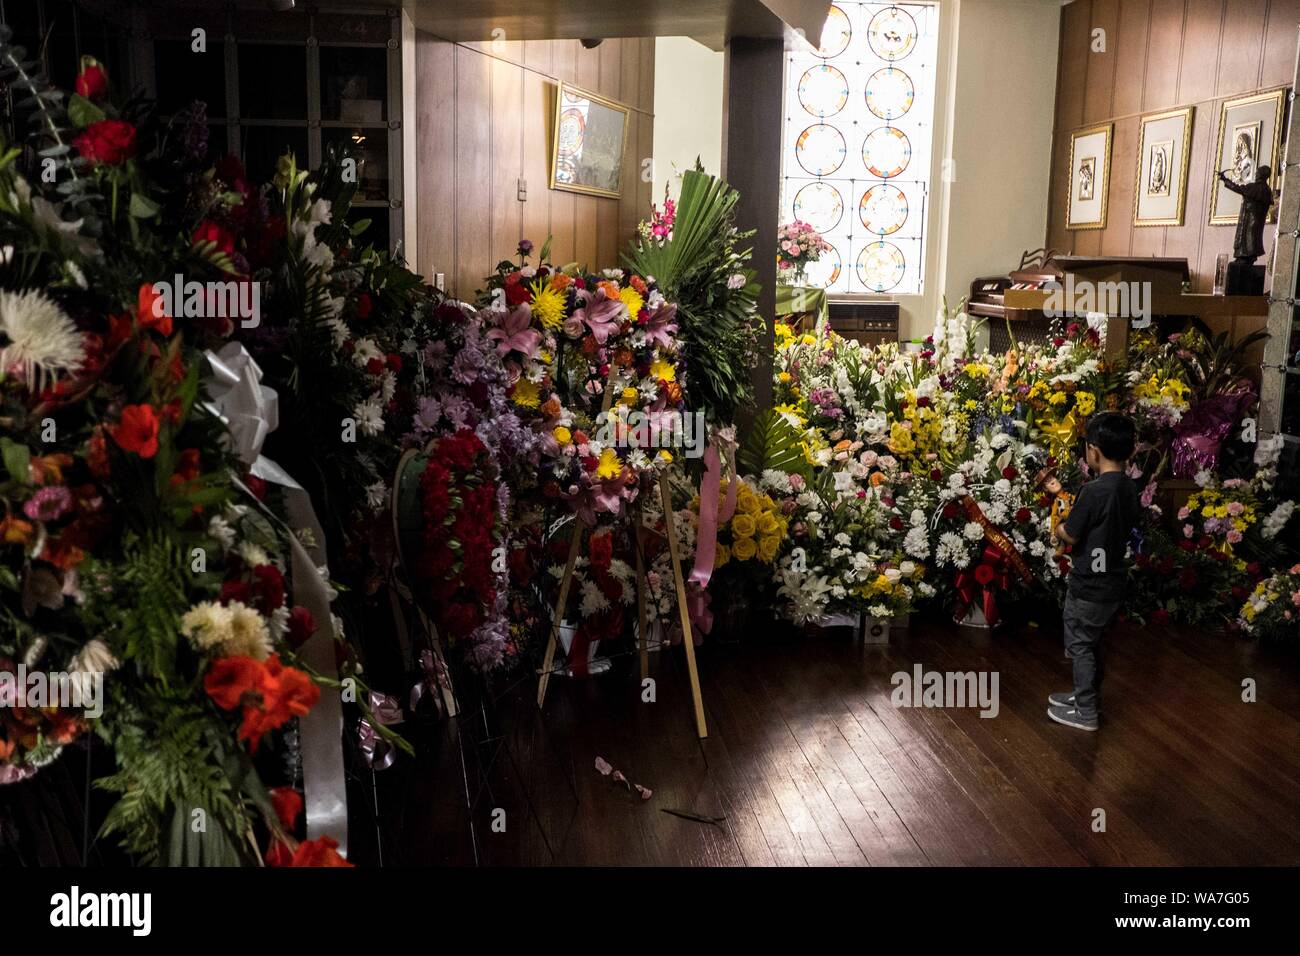 Ian Ben 5 Of El Paso Looks At A Display Of Flowers To Be Loaded Into